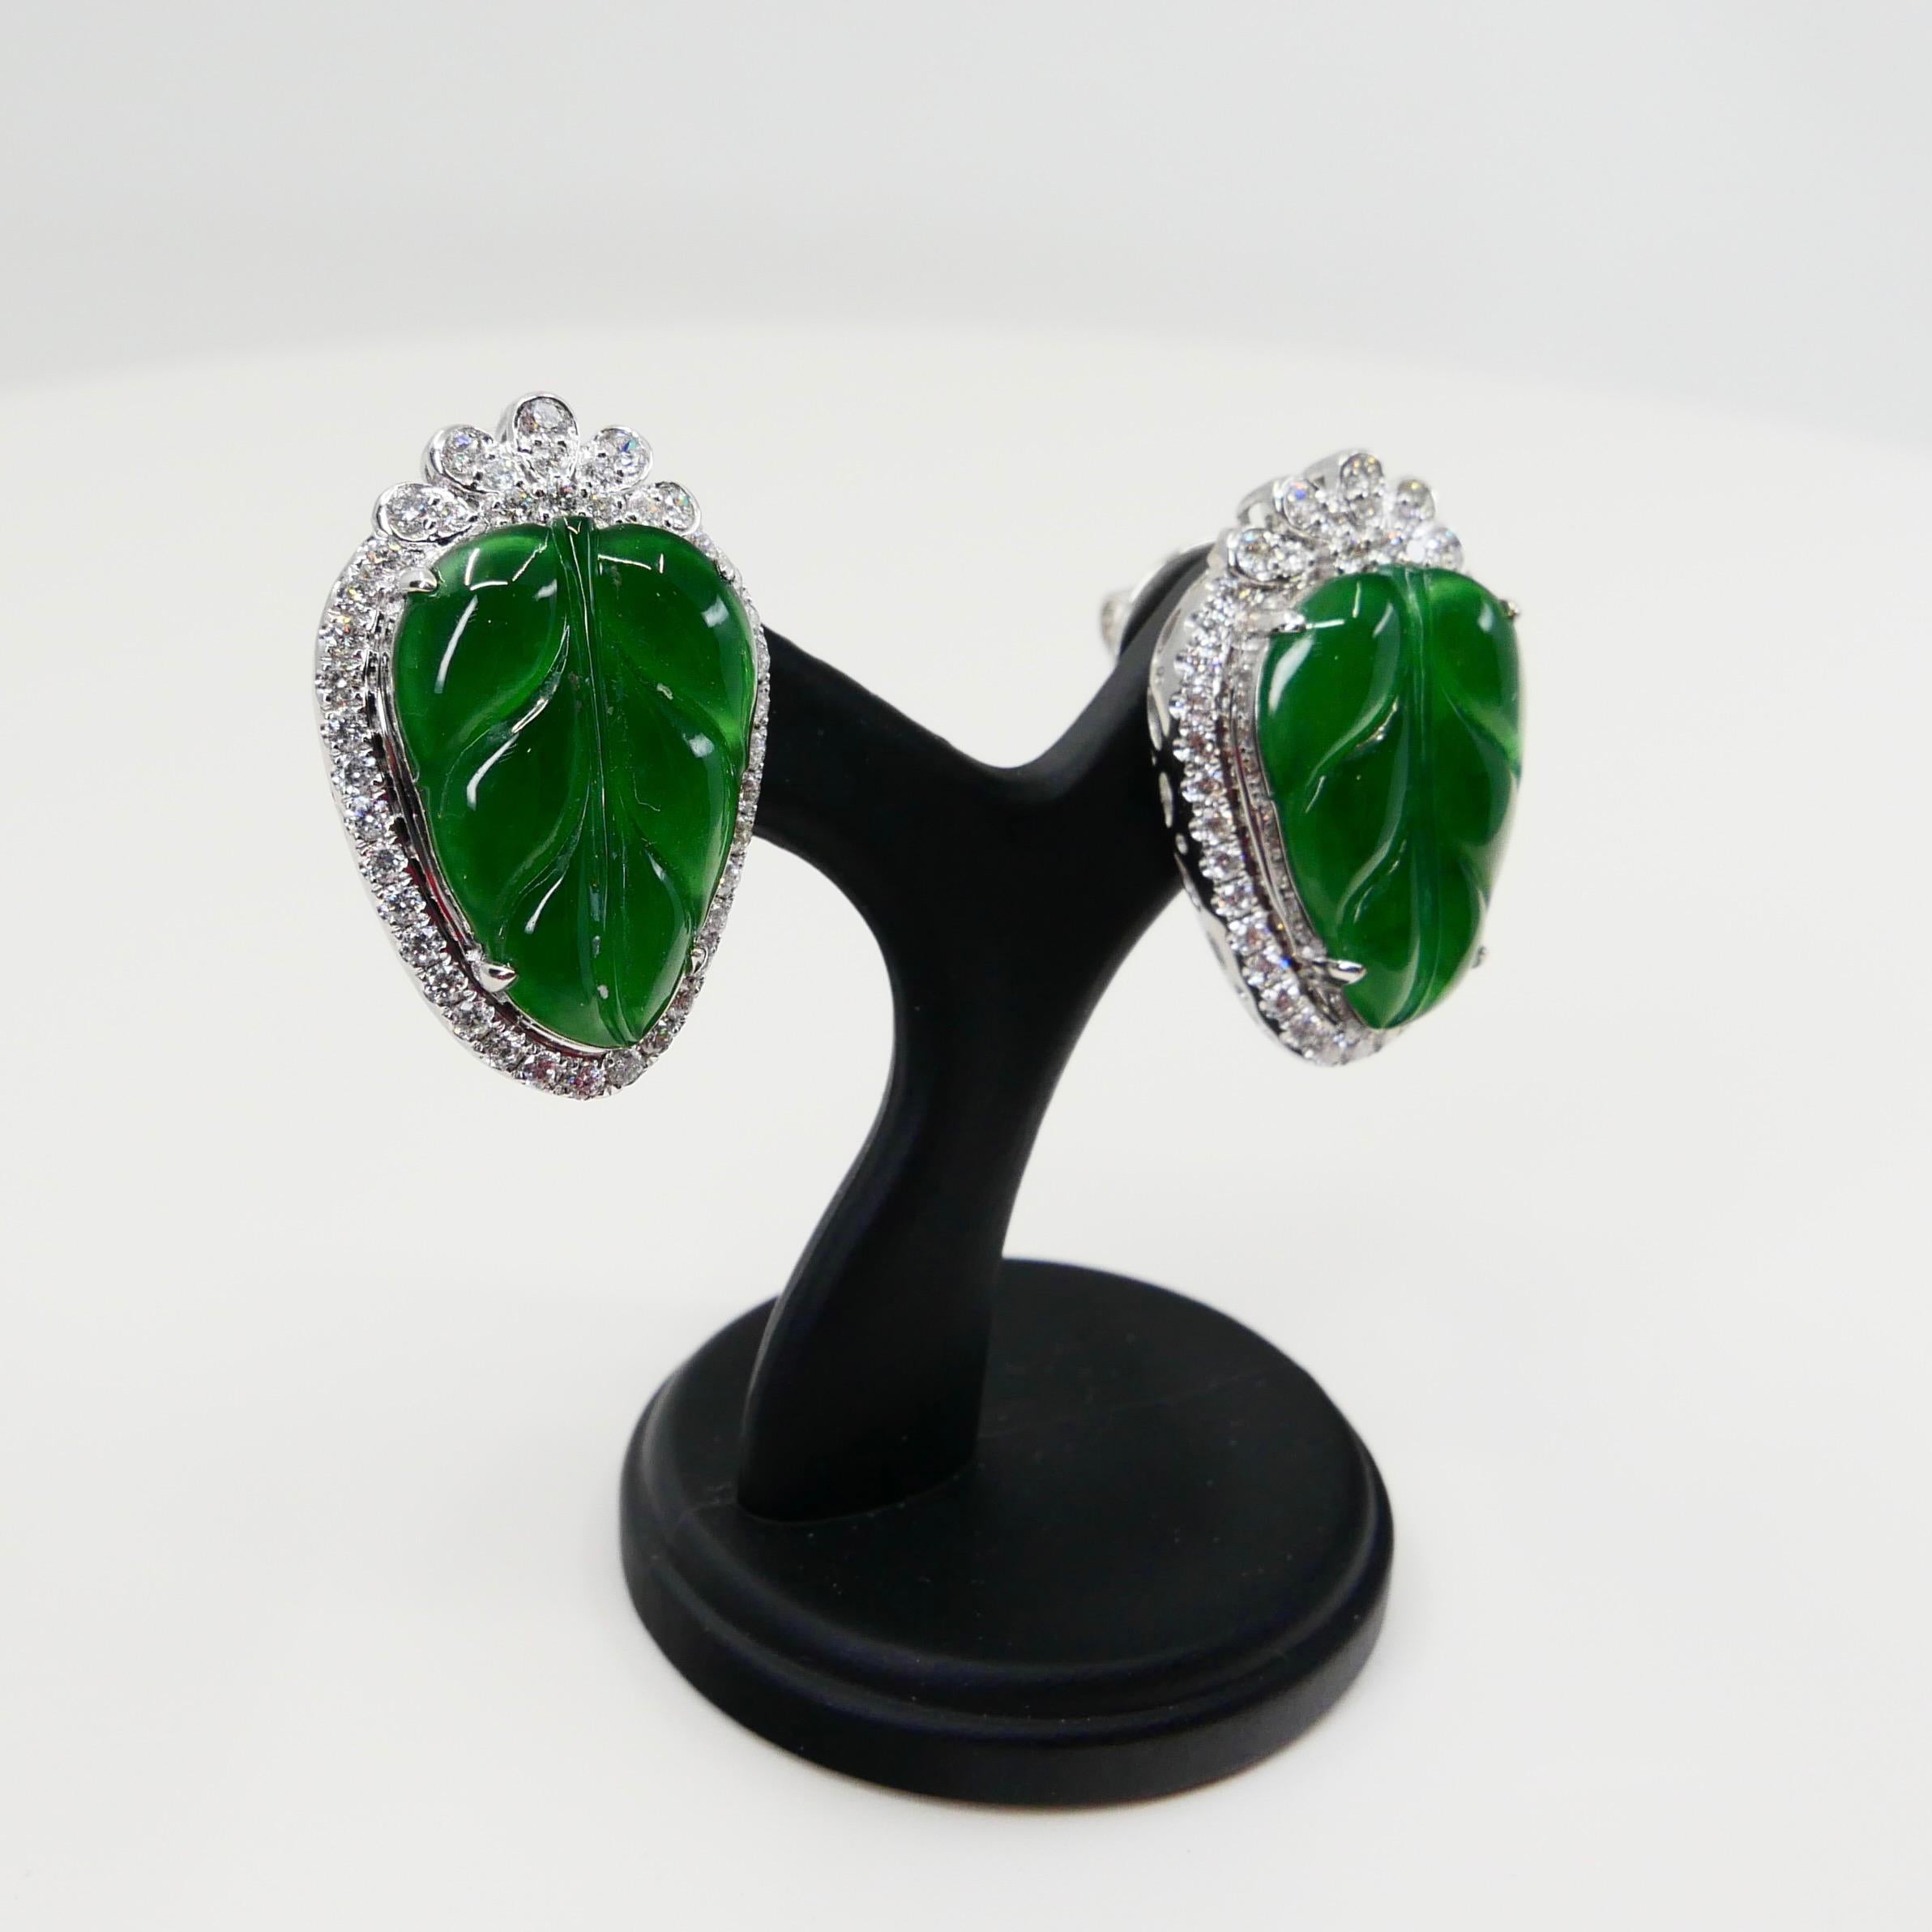 Rough Cut Certified Icy Imperial Green Jade and Diamond Earrings, Collector's Quality For Sale